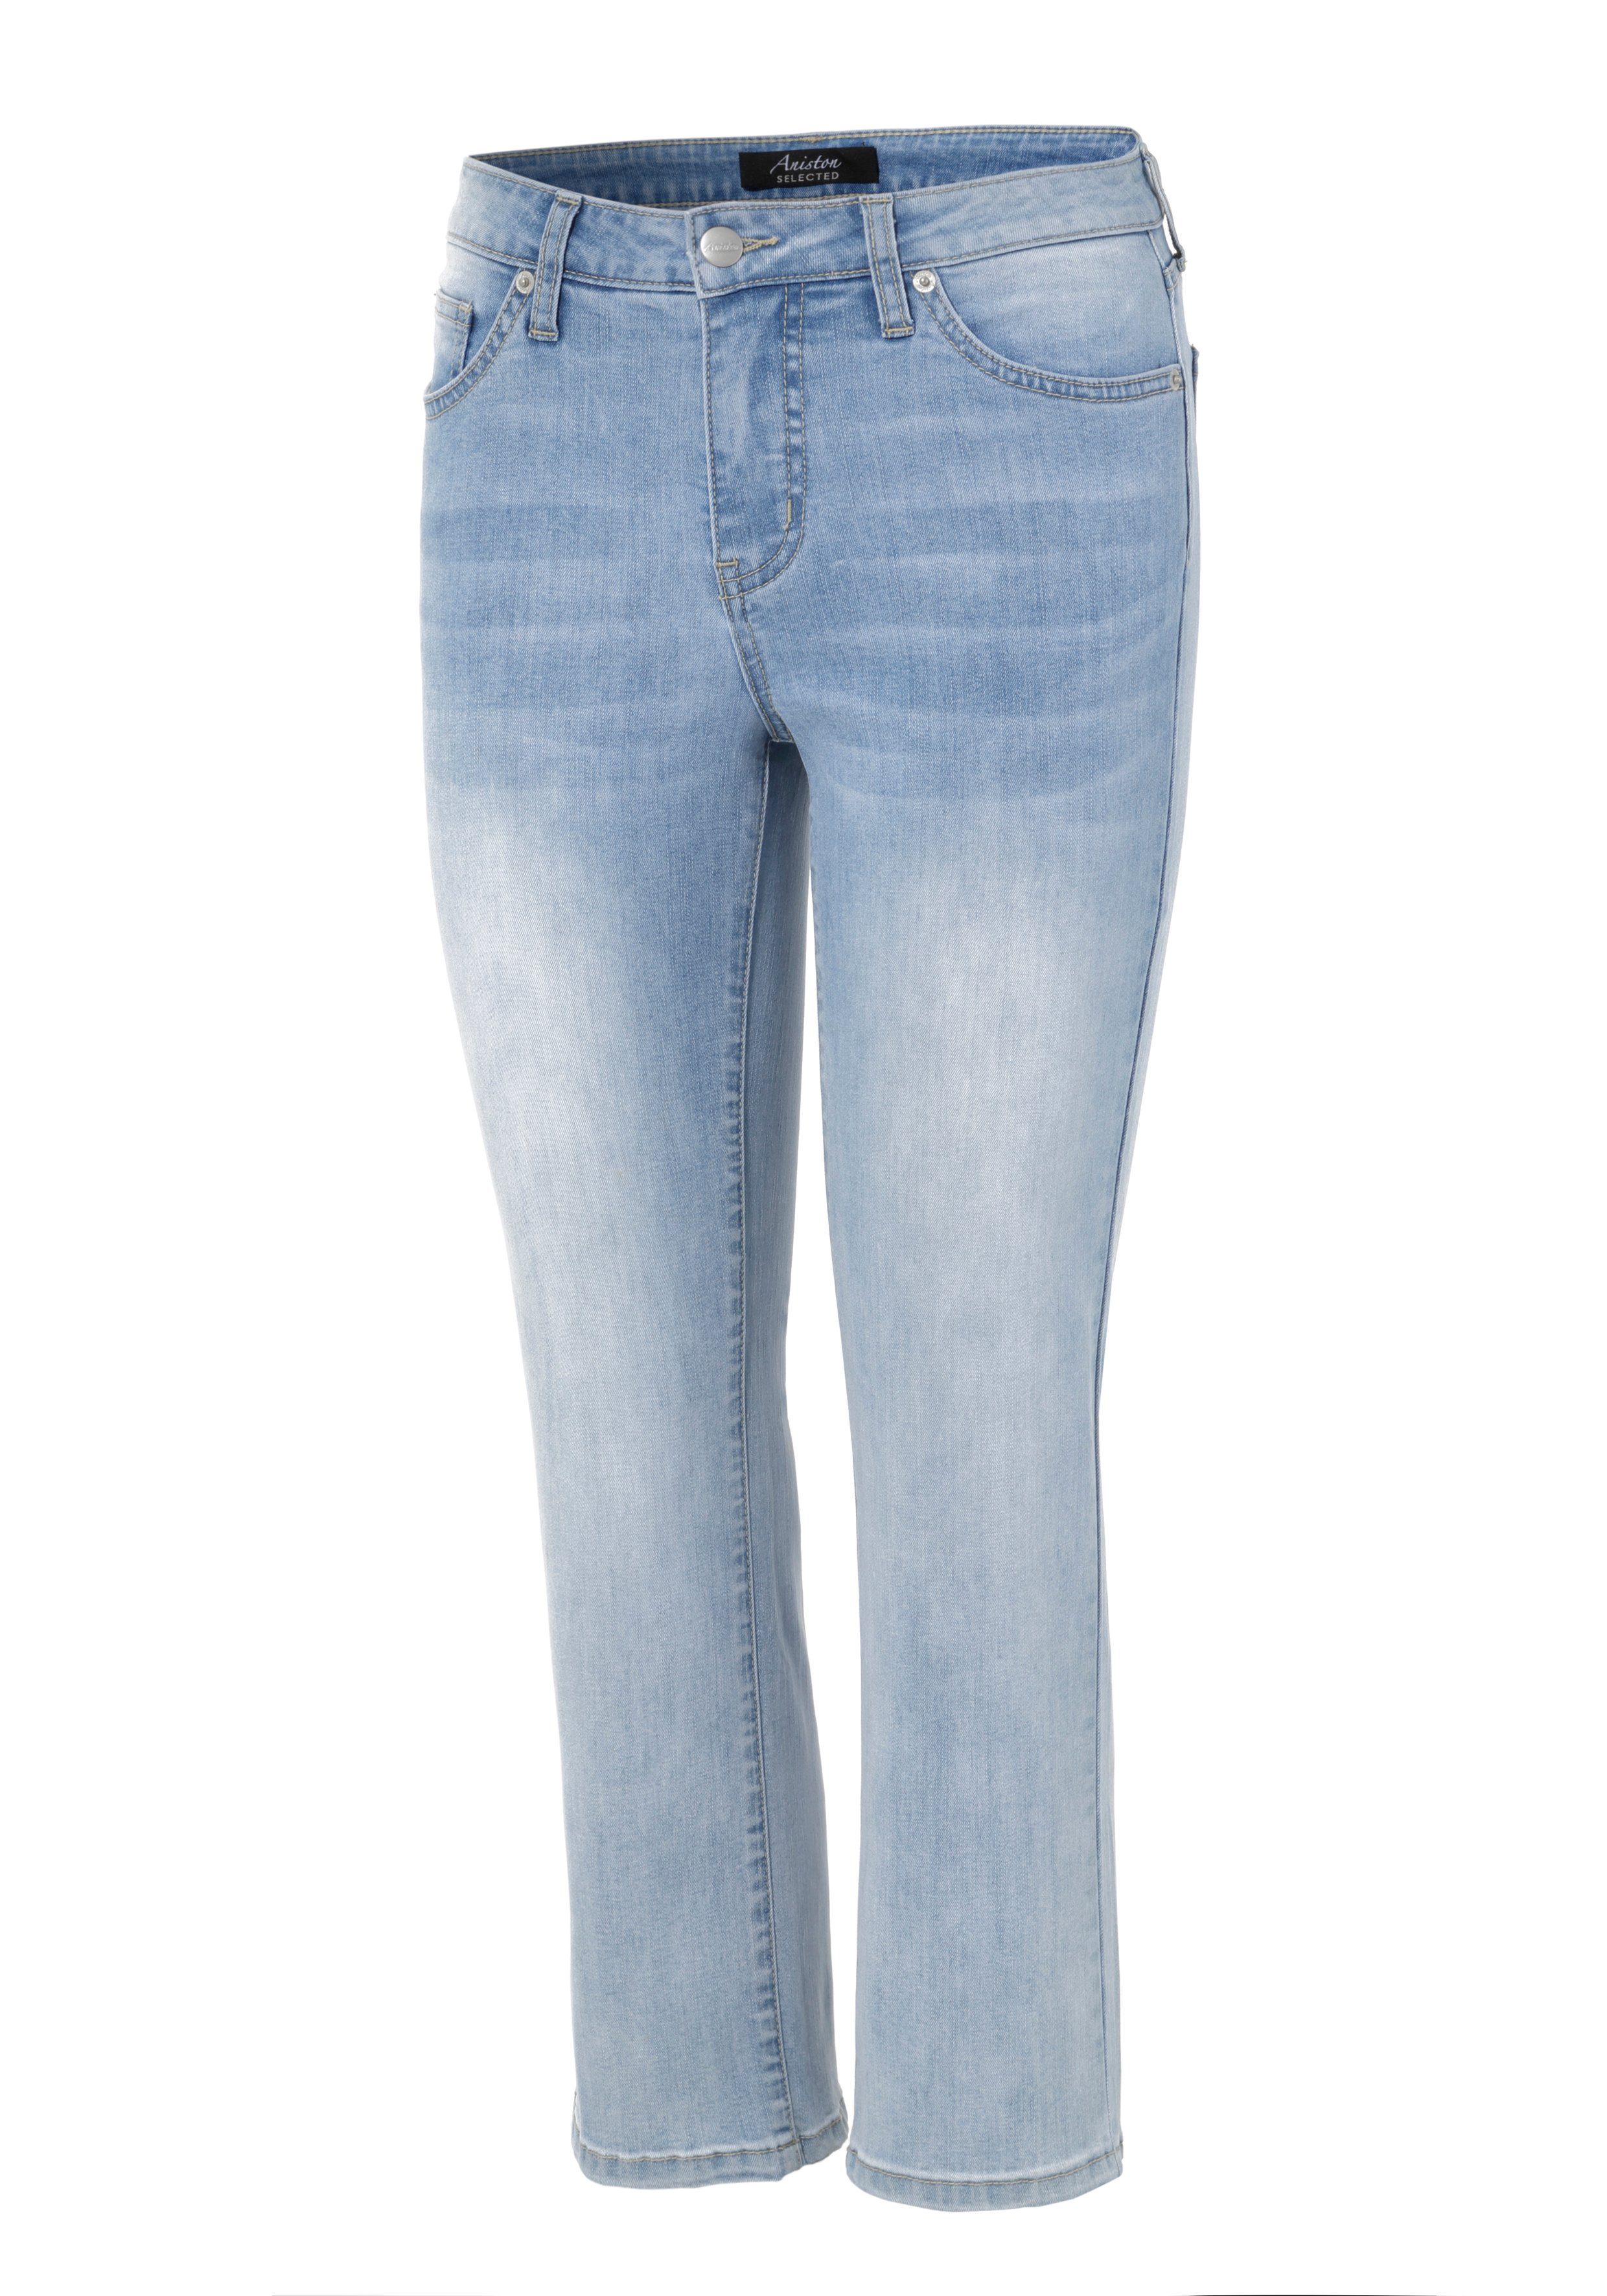 Straight-Jeans light-blue-washed SELECTED Länge Aniston in cropped verkürzter